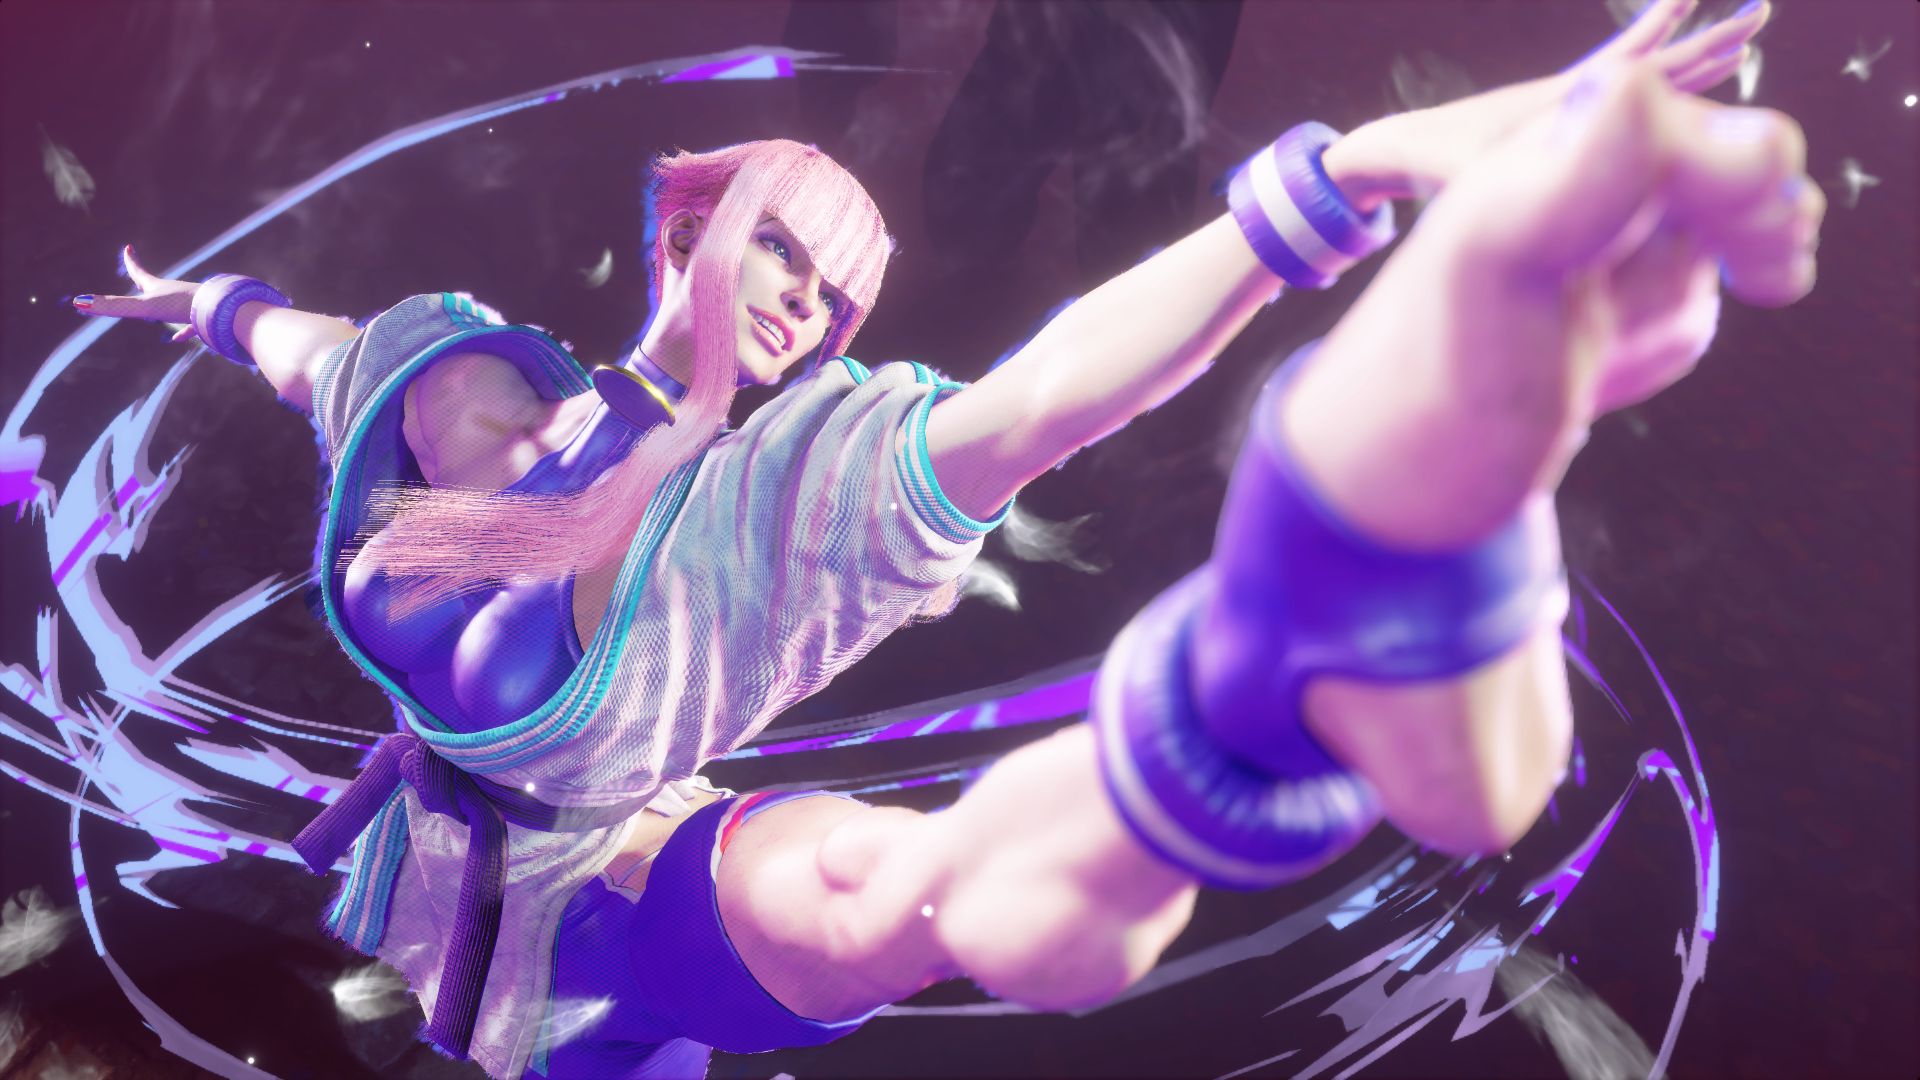 The Internet Reacts To Street Fighter 6's New Cammy